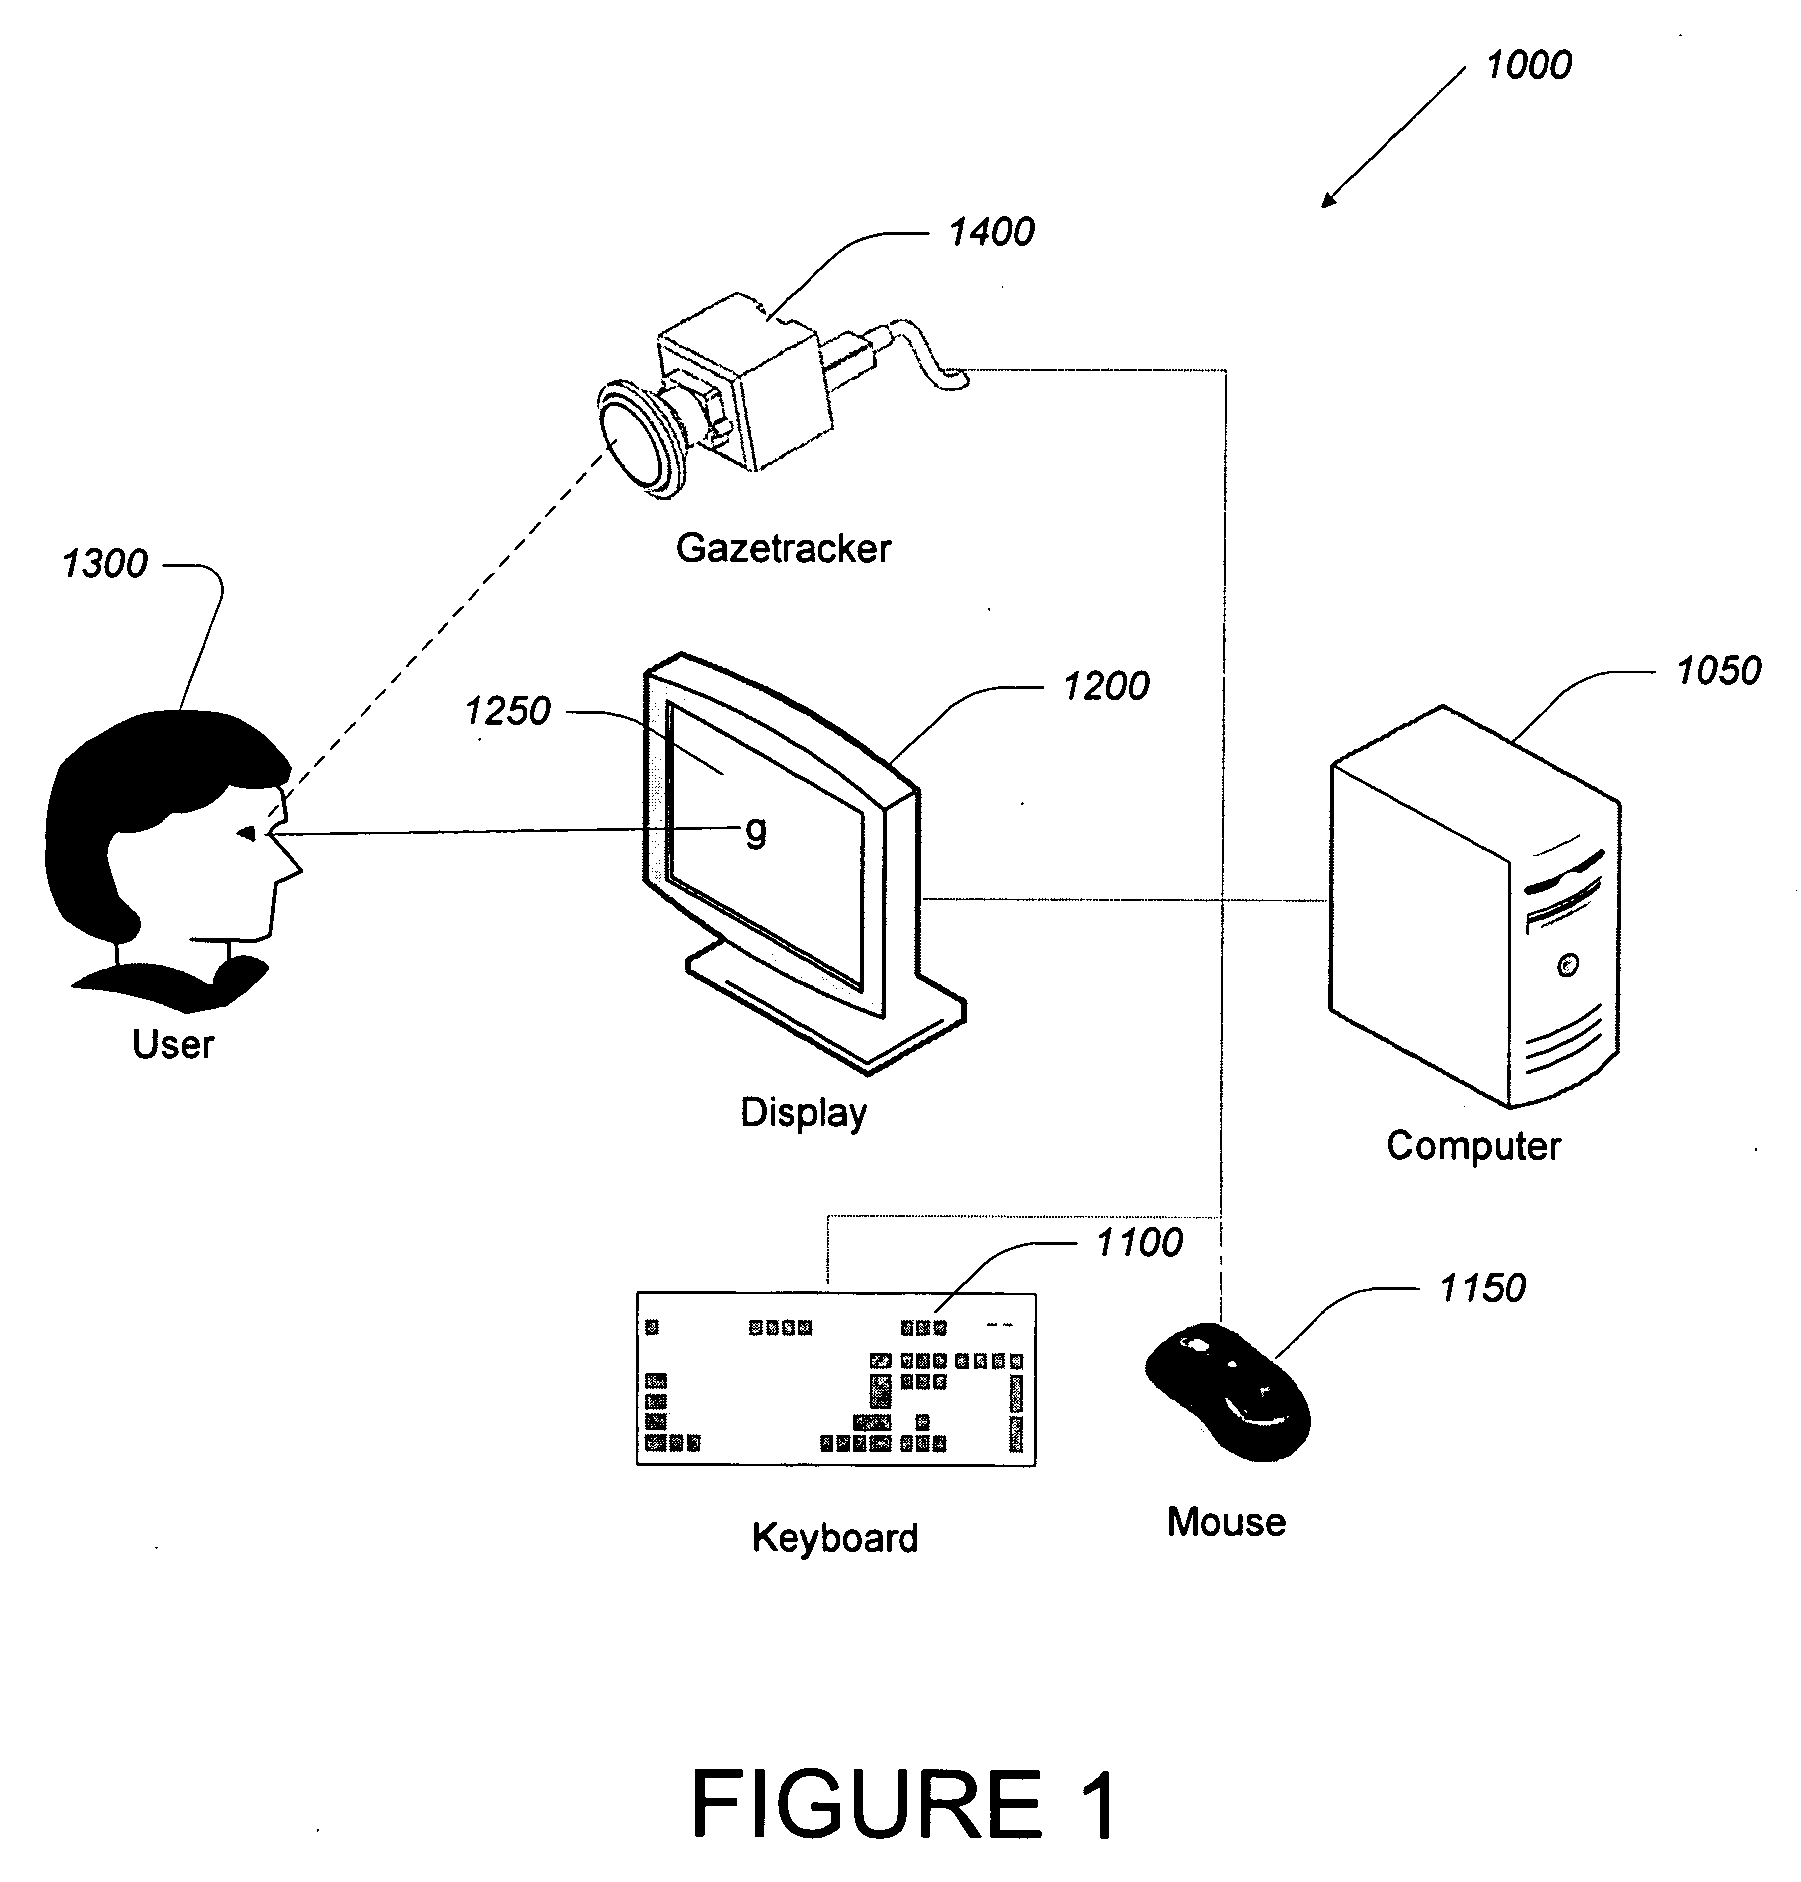 Method and apparatus for secure display of visual content